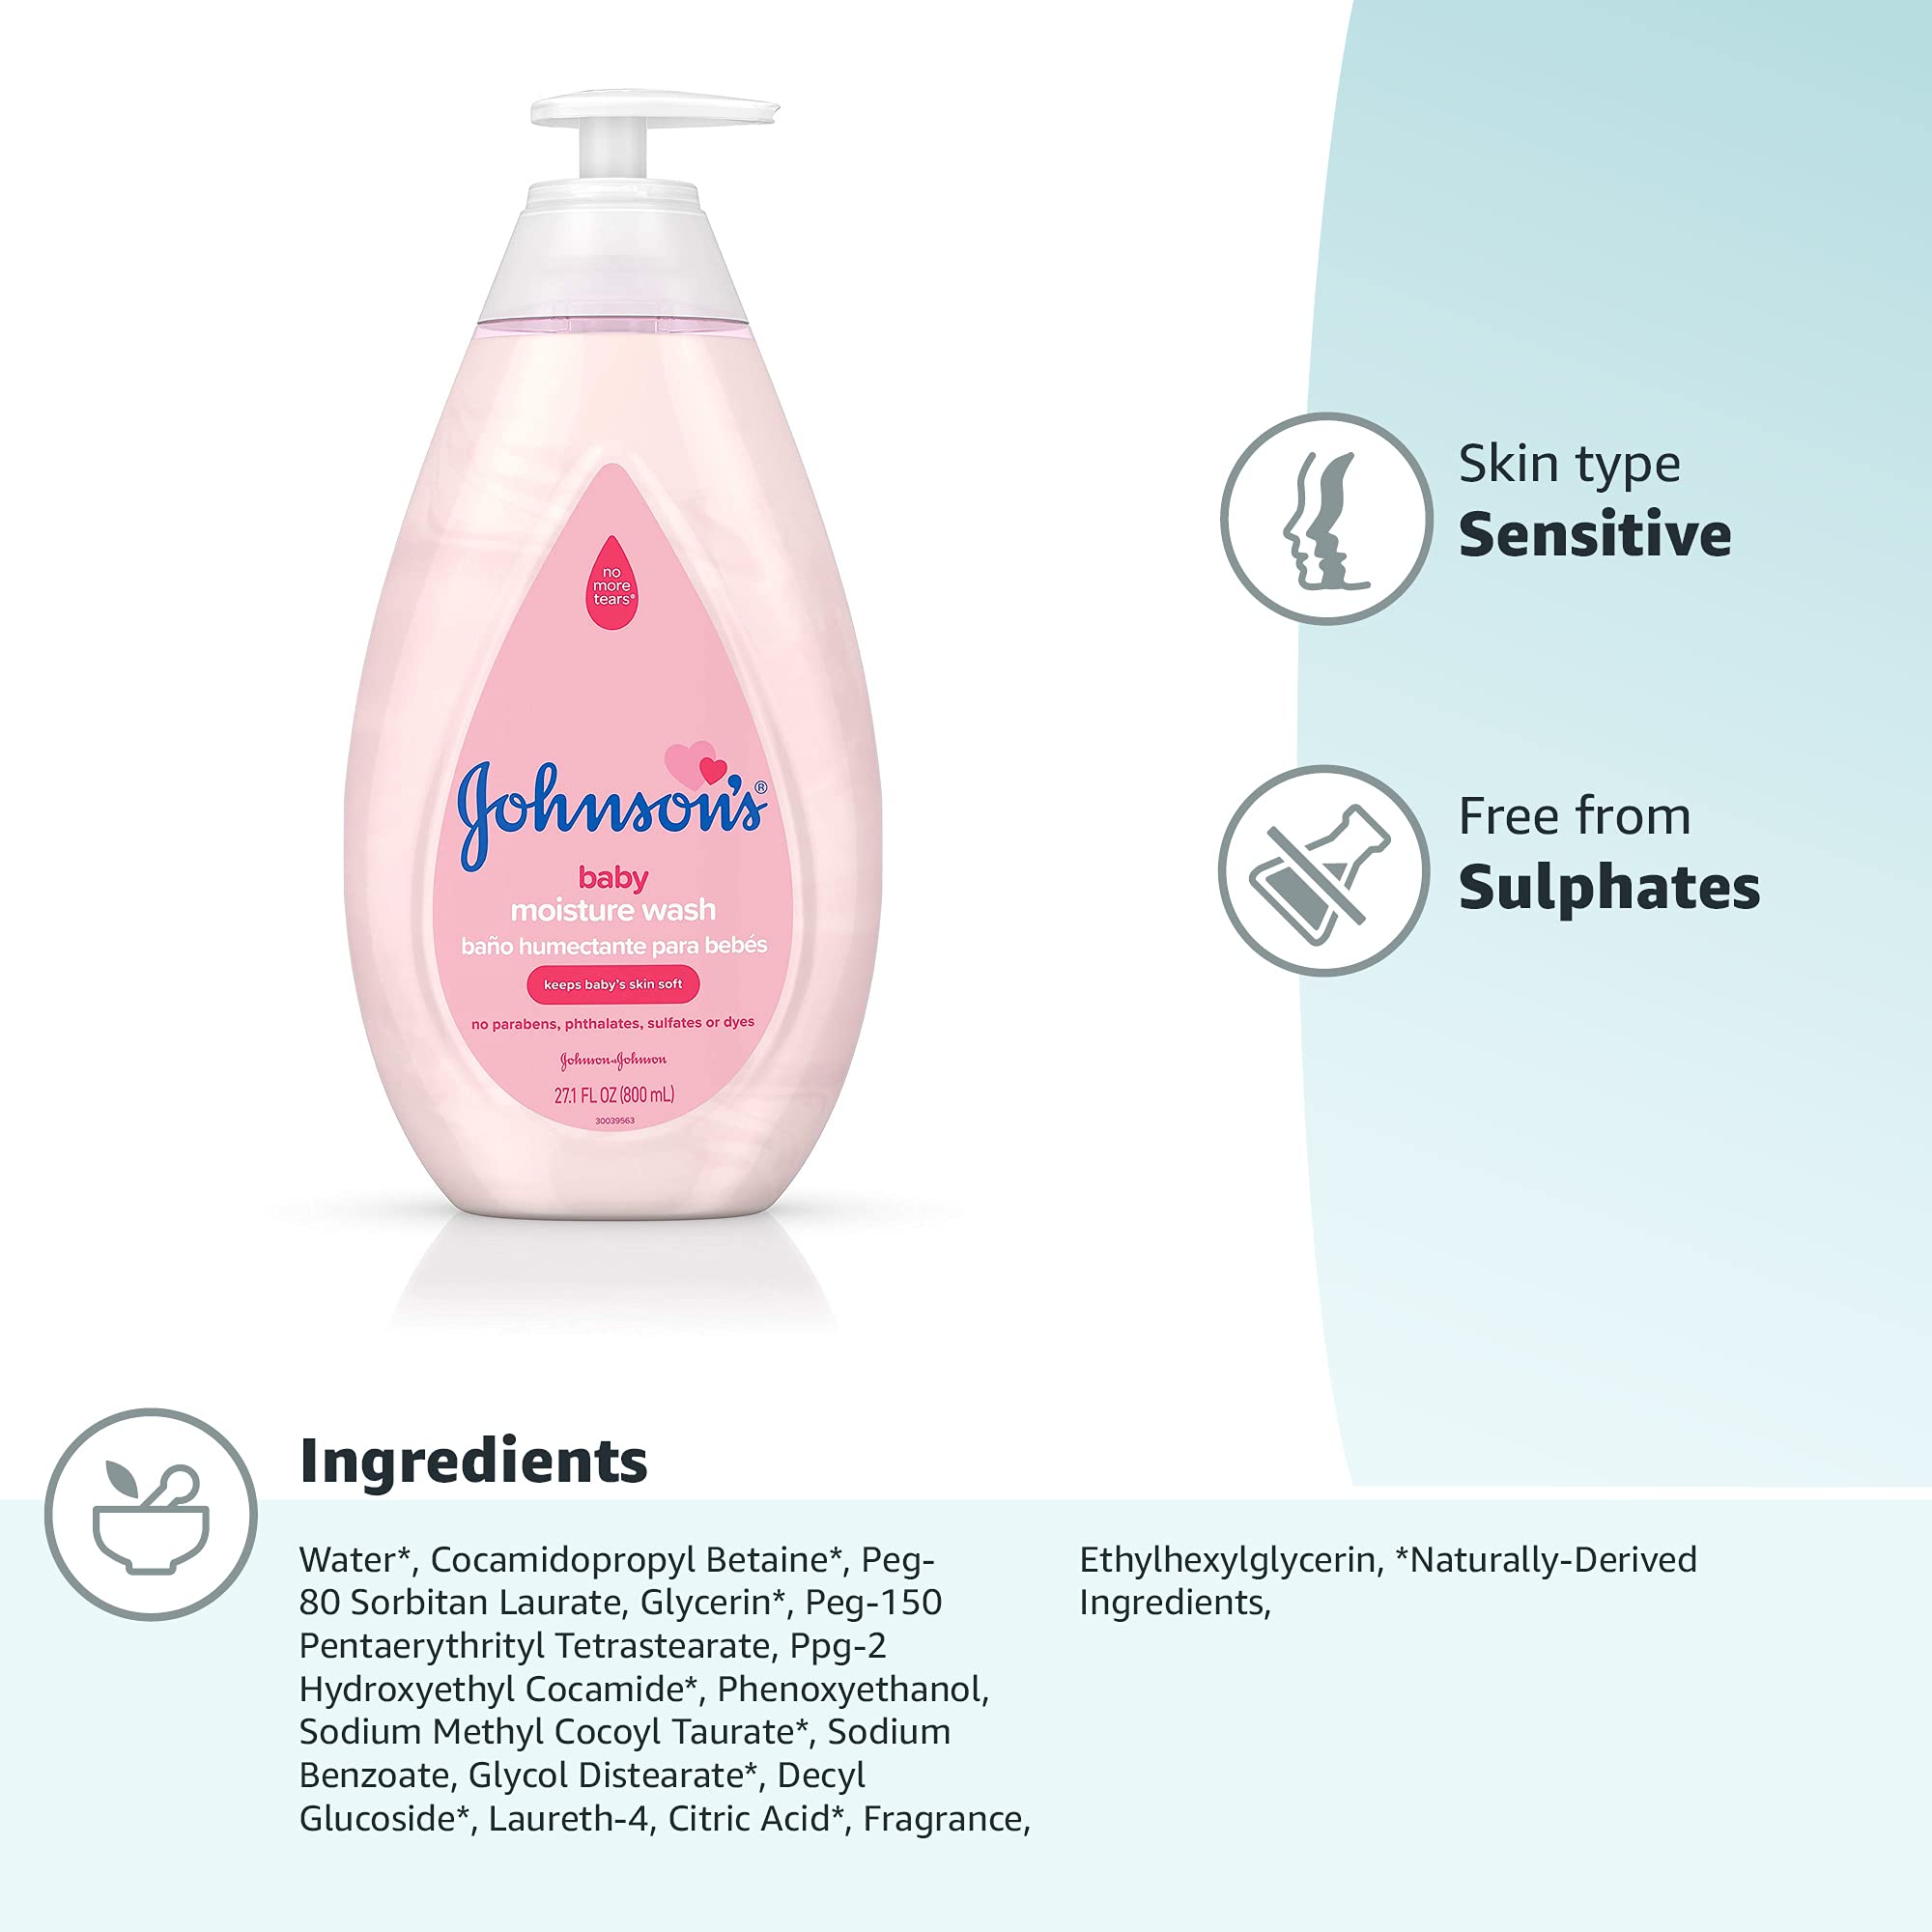 Johnson's Baby Body Moisture Wash for Gentle Baby Skin Care, Sulfate-Free, Tear-Free, Hypoallergenic Baby Wash, 27.1 fl. oz